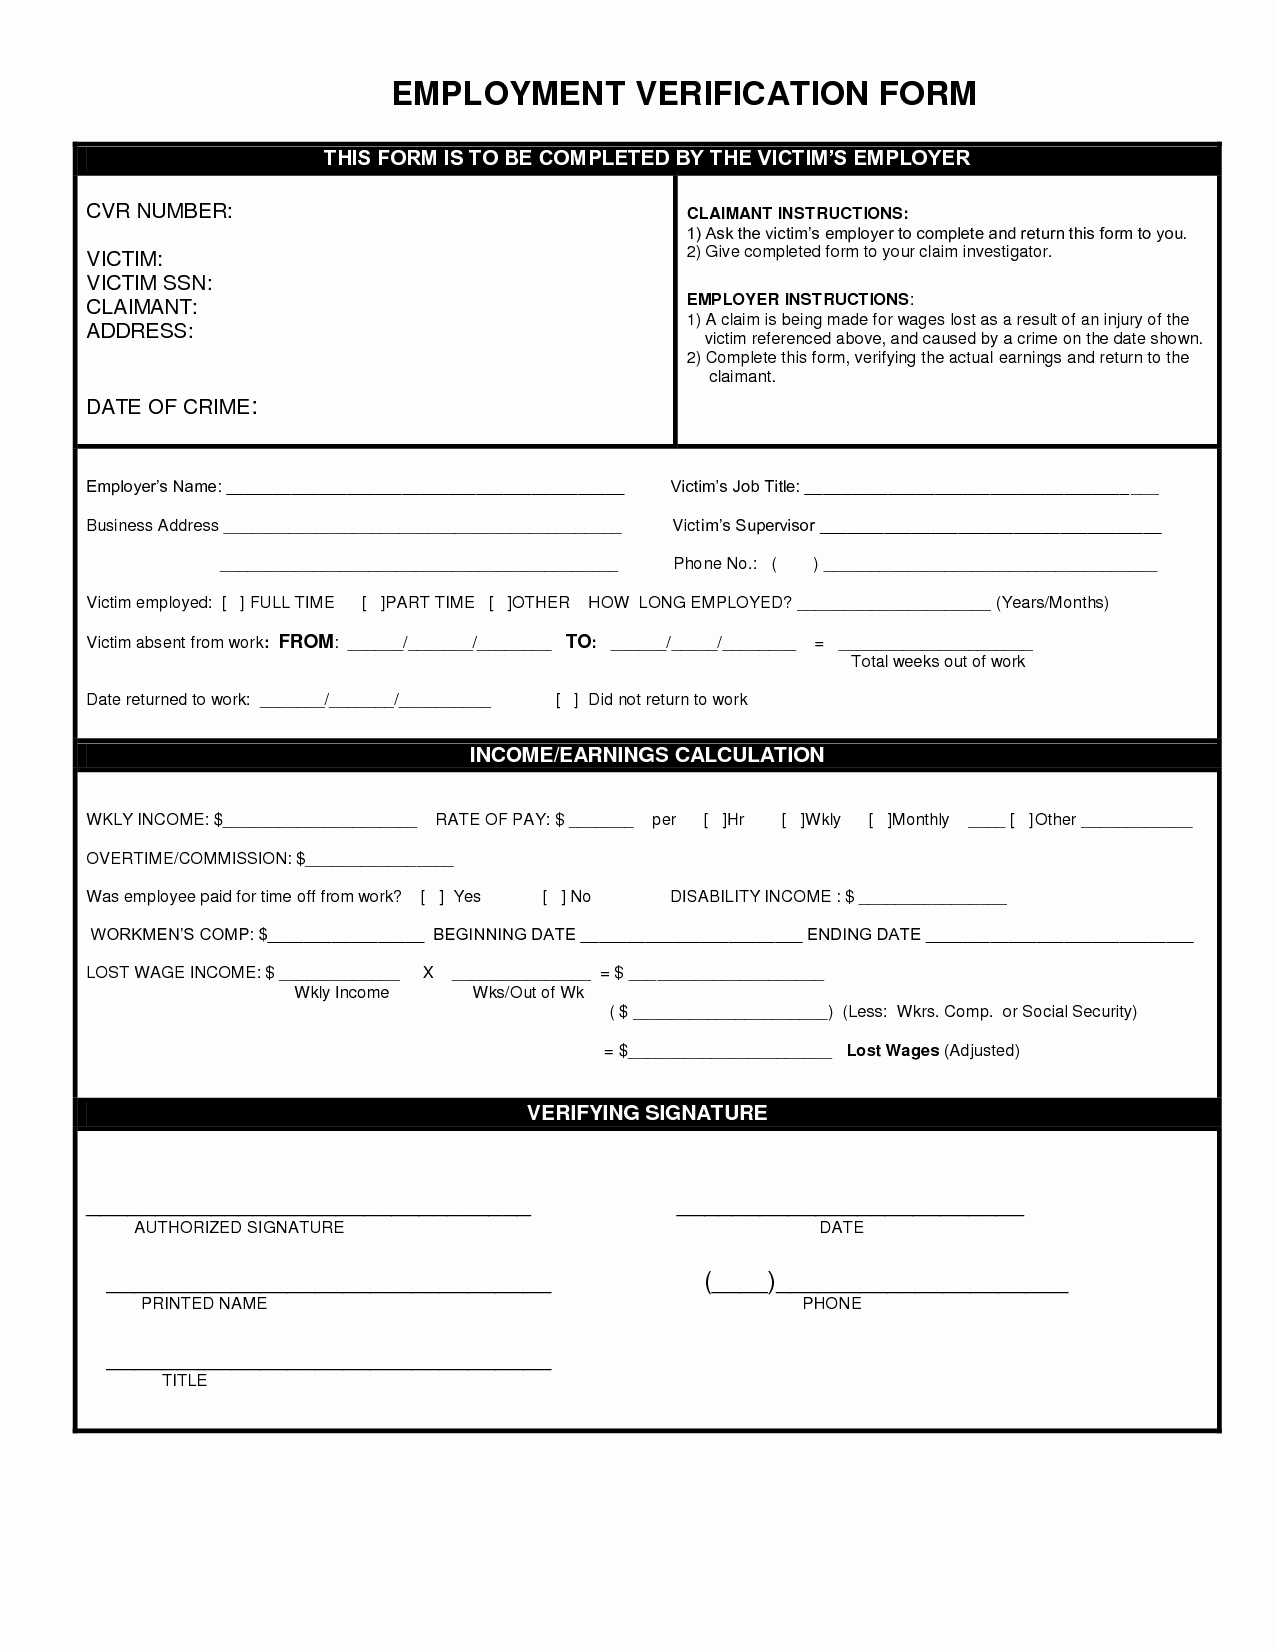 Employment Verification form Template Awesome Employment Verification form